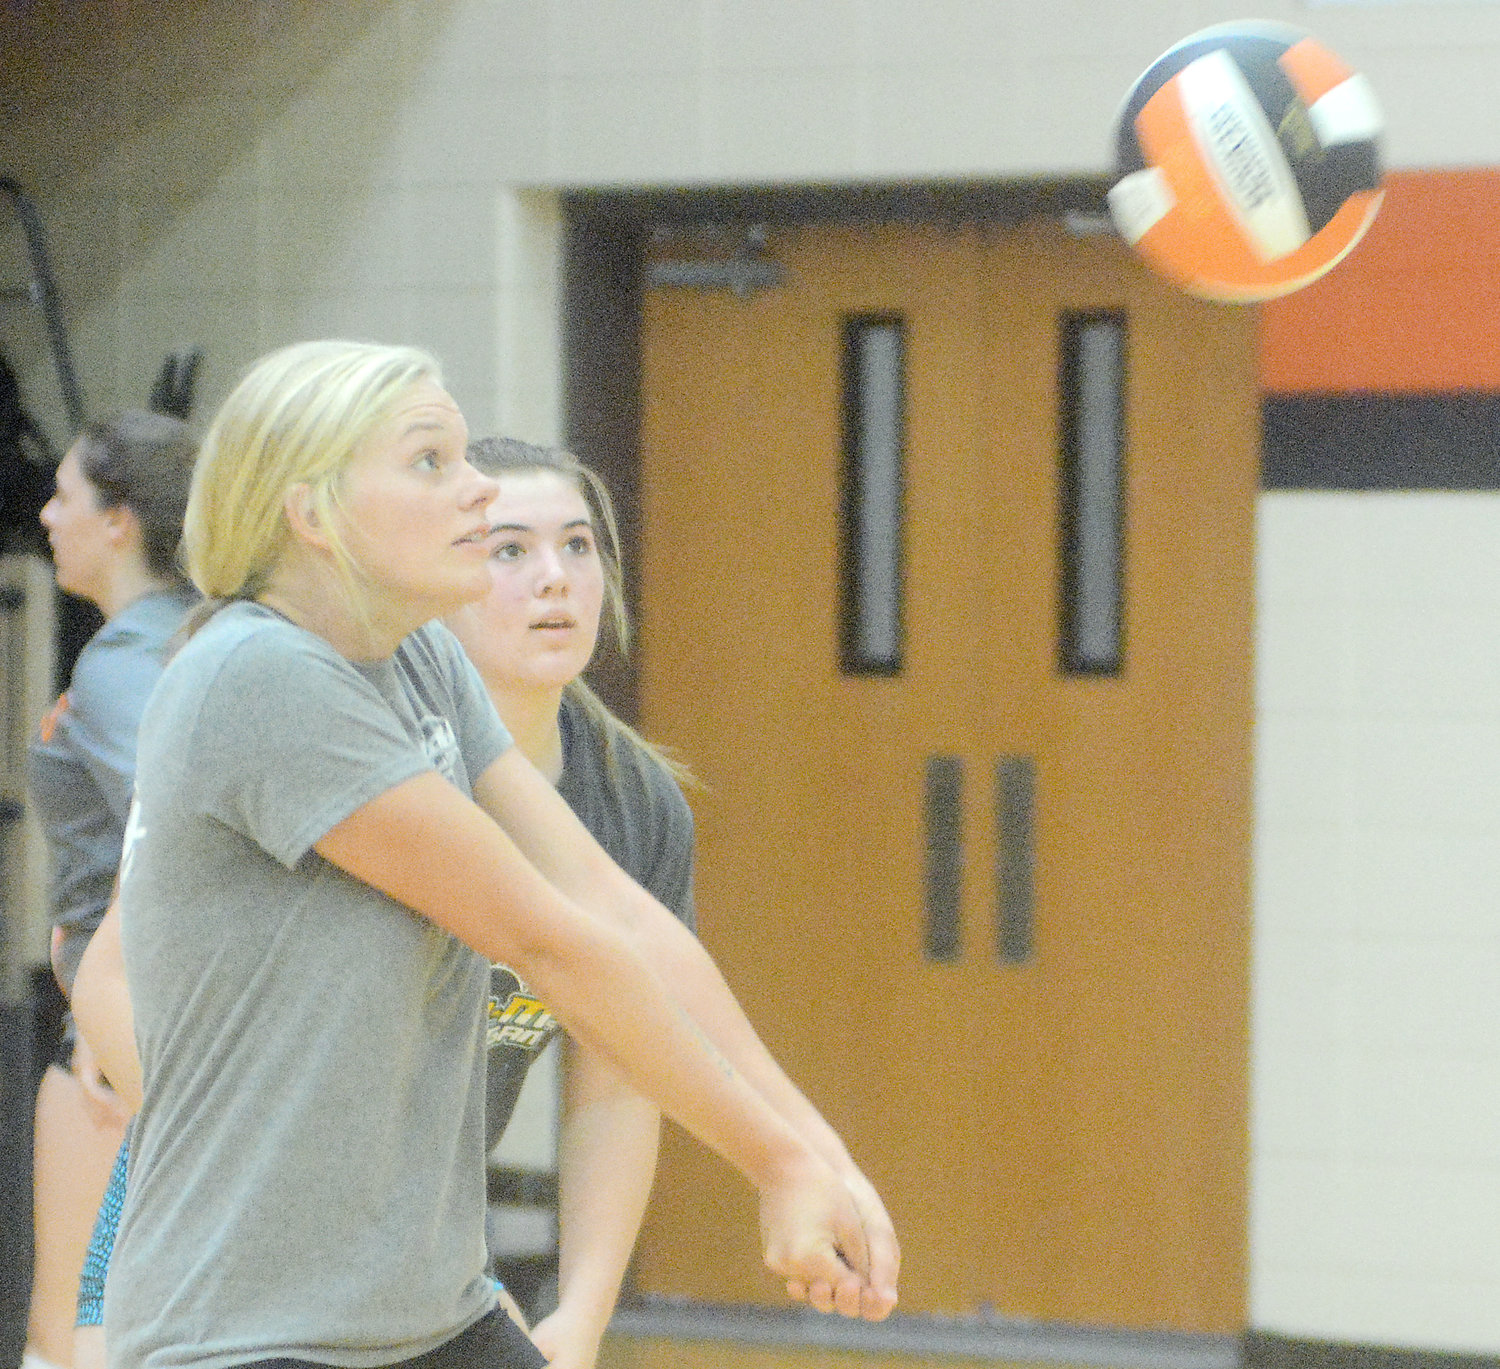 Josie Gerlemann (left) steps in front of teammate Maddie Lewis to bump the ball towards a setter during a recent Dutchgirl volleyball practice inside the Owensville High School main gym. Jaime Ridenhour’s Dutchgirl volleyball squad will compete in their preseason jamboree on Tuesday, Aug. 23 at Sullivan High School against the host Lady Eagles and Potosi Lady Trojans.